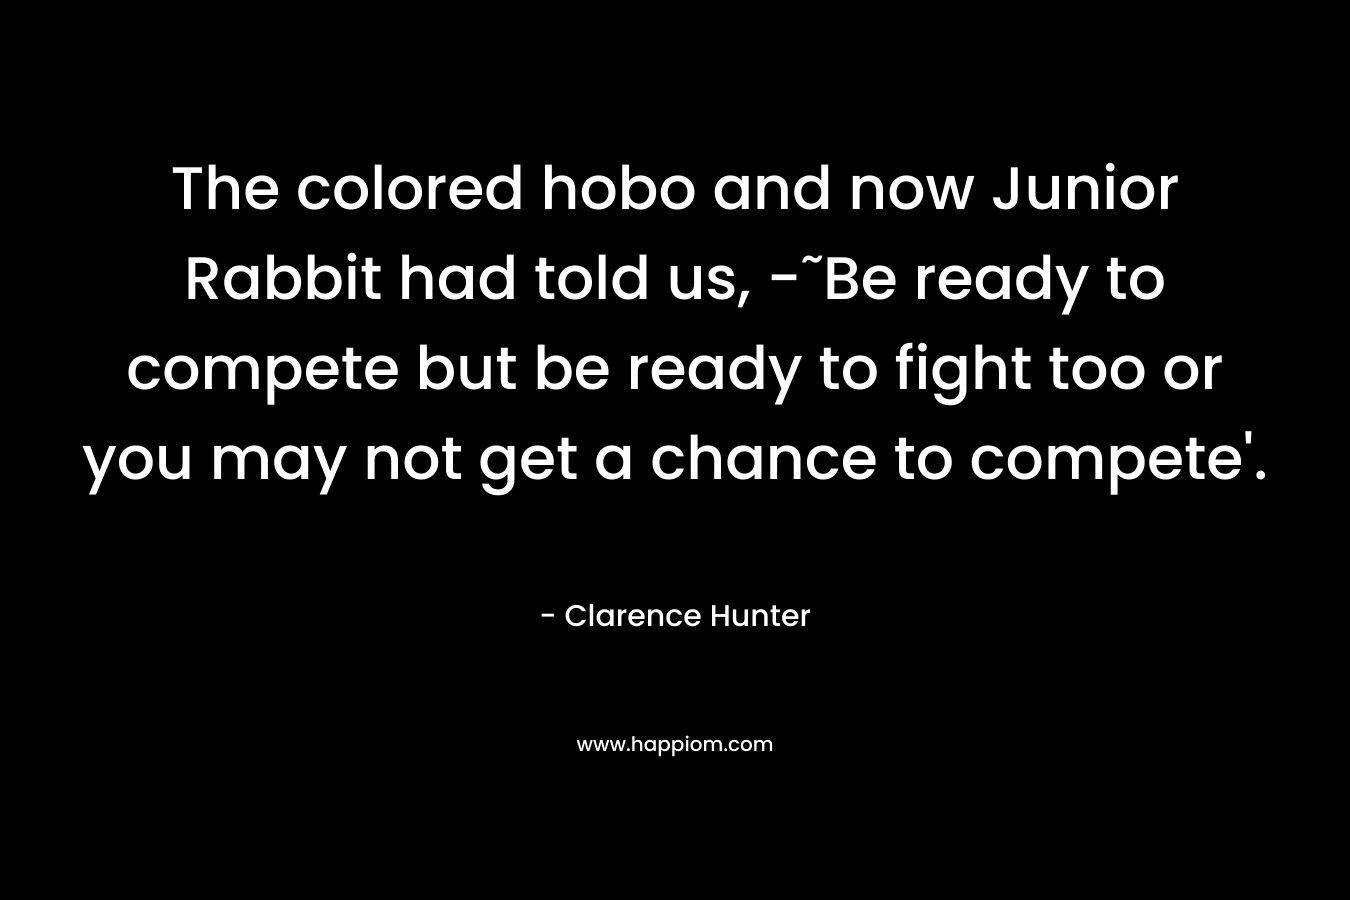 The colored hobo and now Junior Rabbit had told us, -˜Be ready to compete but be ready to fight too or you may not get a chance to compete'.